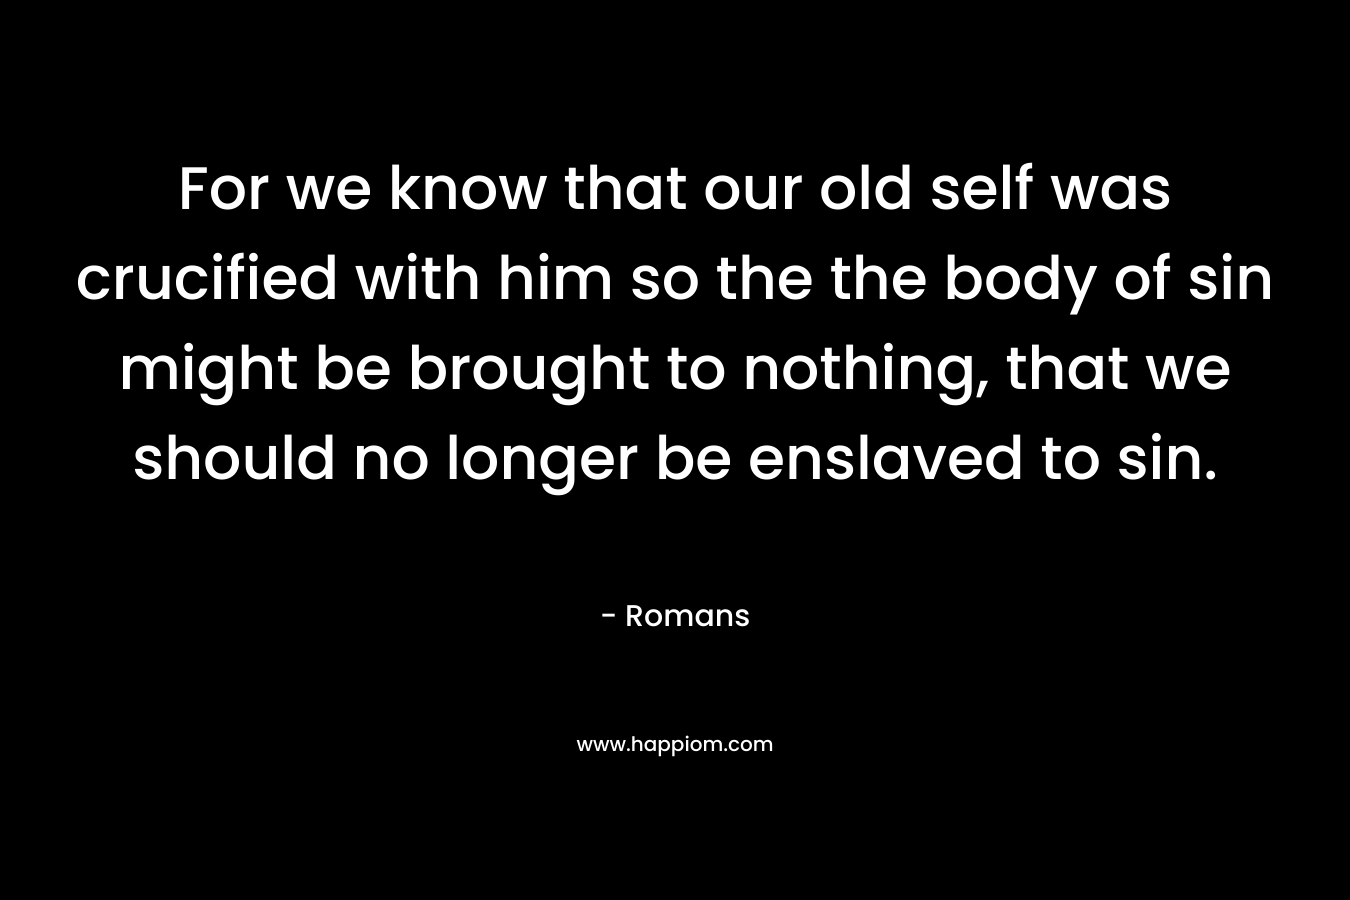 For we know that our old self was crucified with him so the the body of sin might be brought to nothing, that we should no longer be enslaved to sin. – Romans